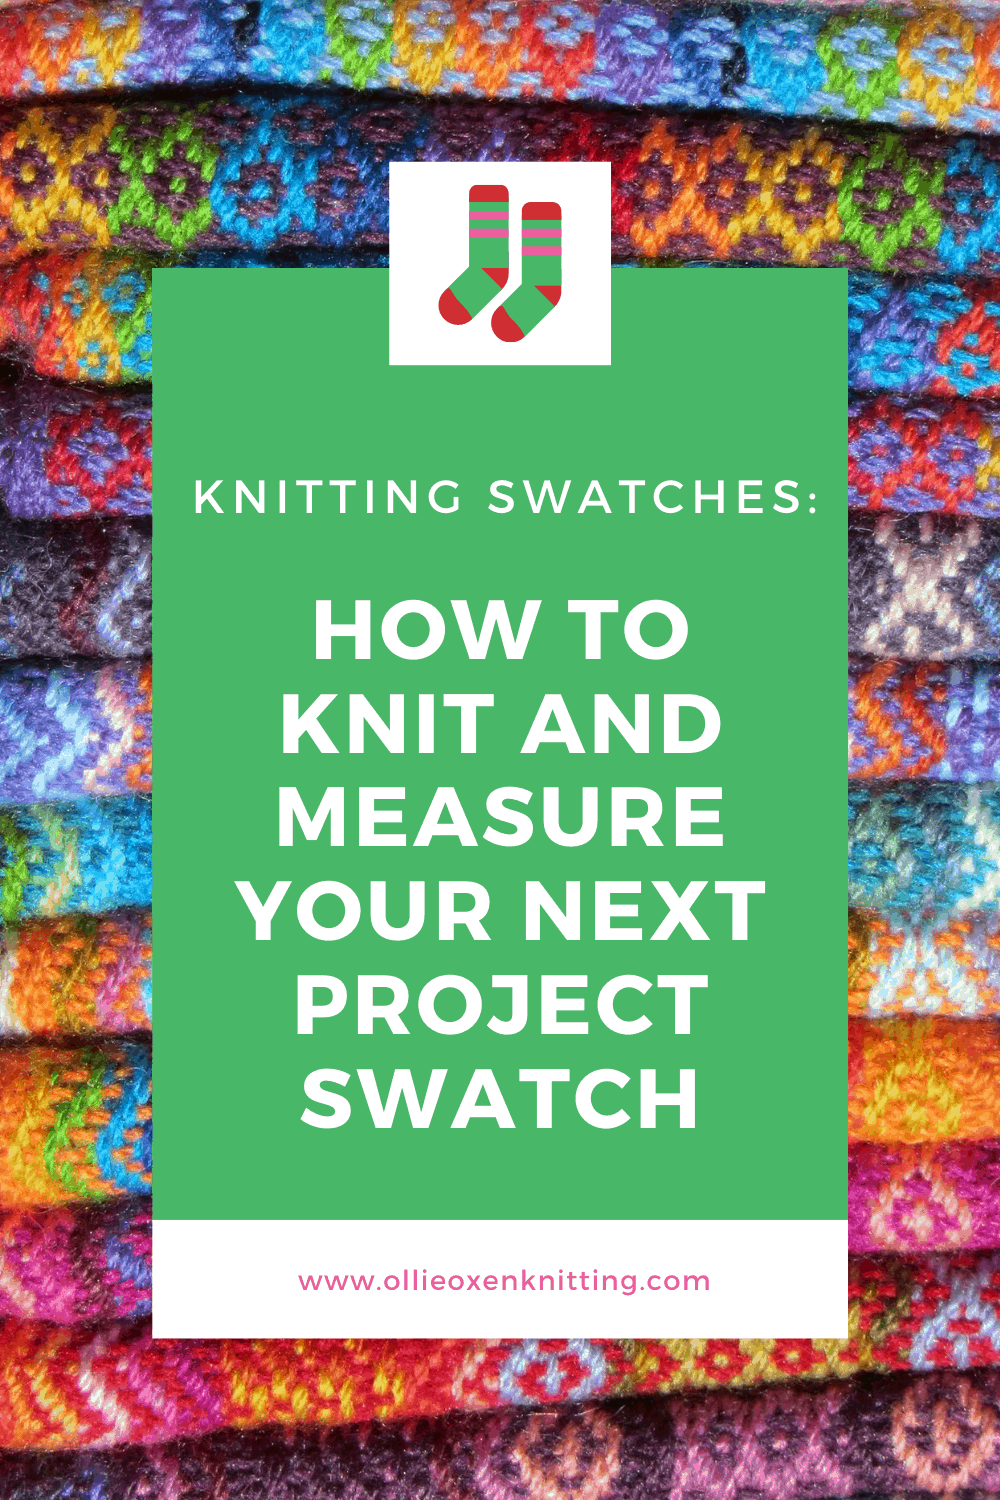 Knitting Swatches: How To Knit And Measure Your Next Project Swatch | Ollie Oxen Knitting